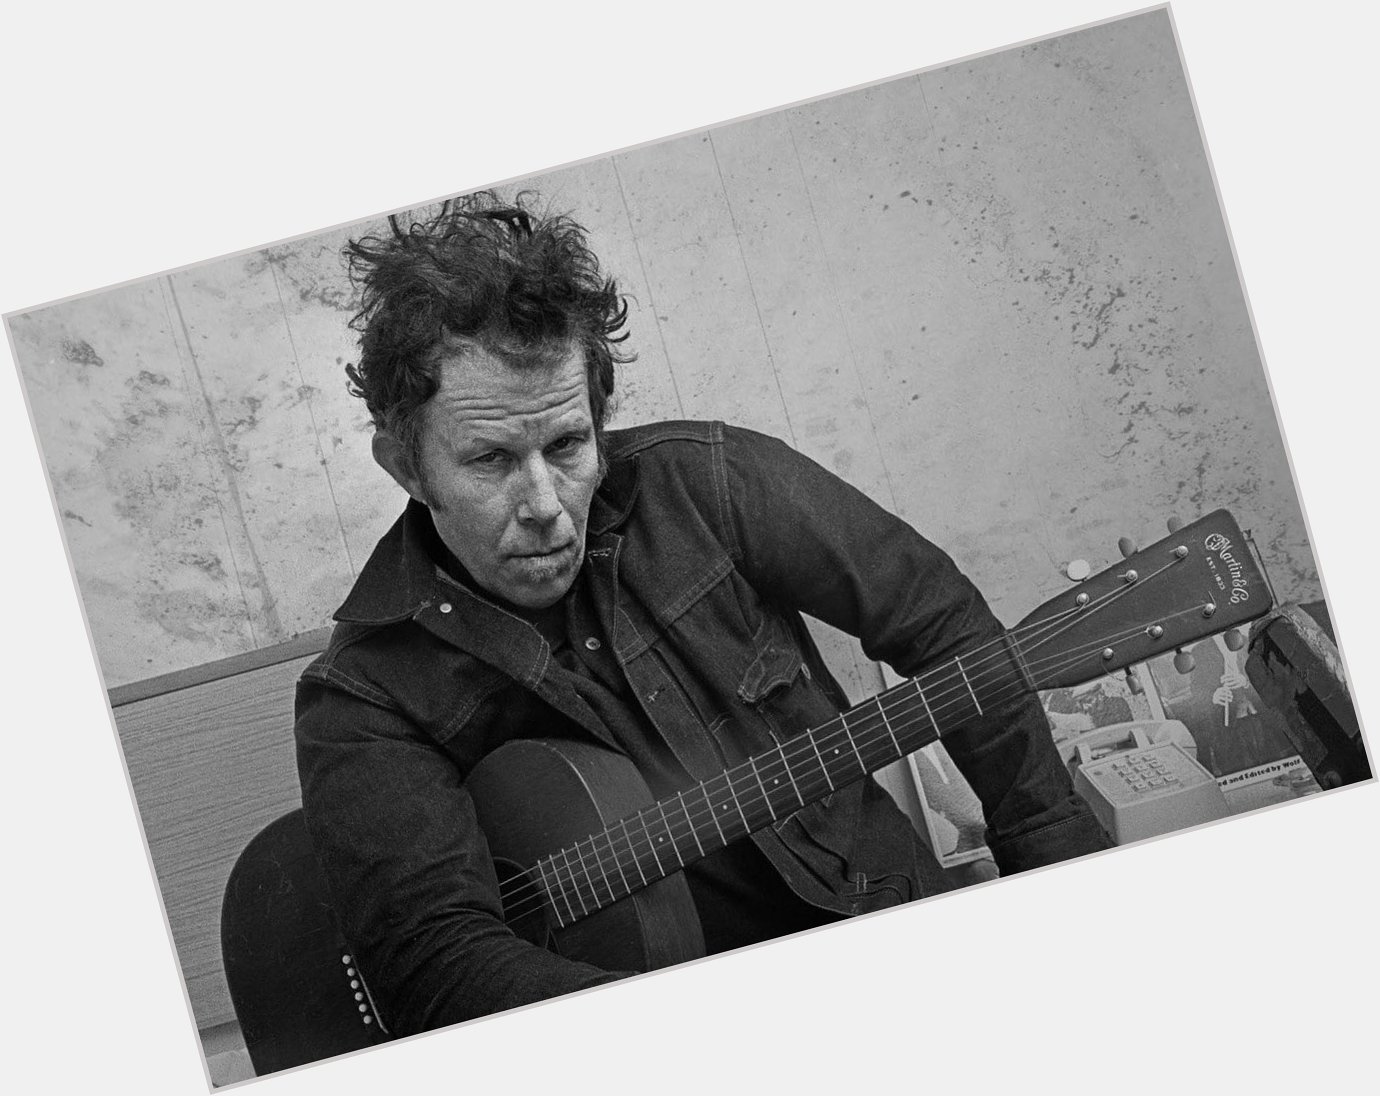 Meant to say happy birthday to my hero yesterday, but, as they say, Tom Waits for no man 